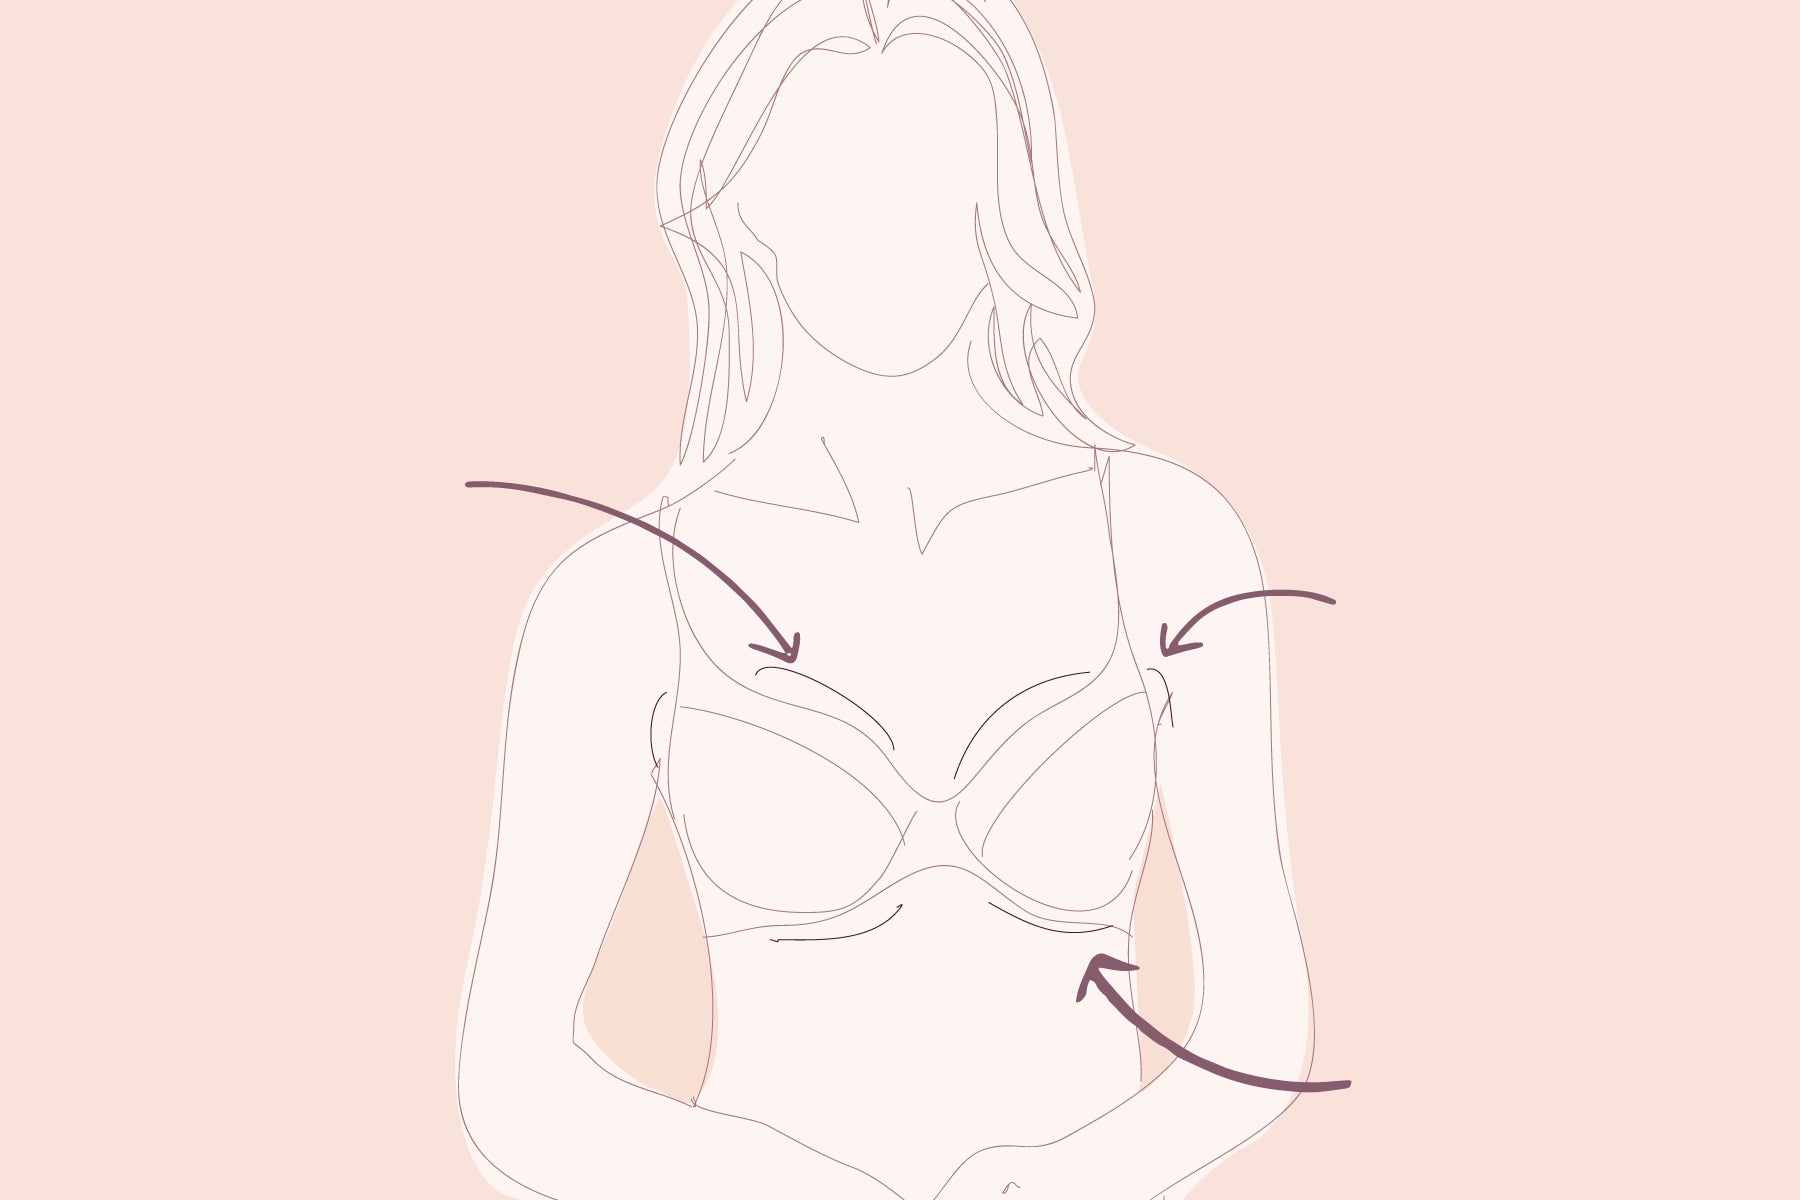 SAGGY BREASTS: Why Some Women Have Them And Others Don't [PHOTOS